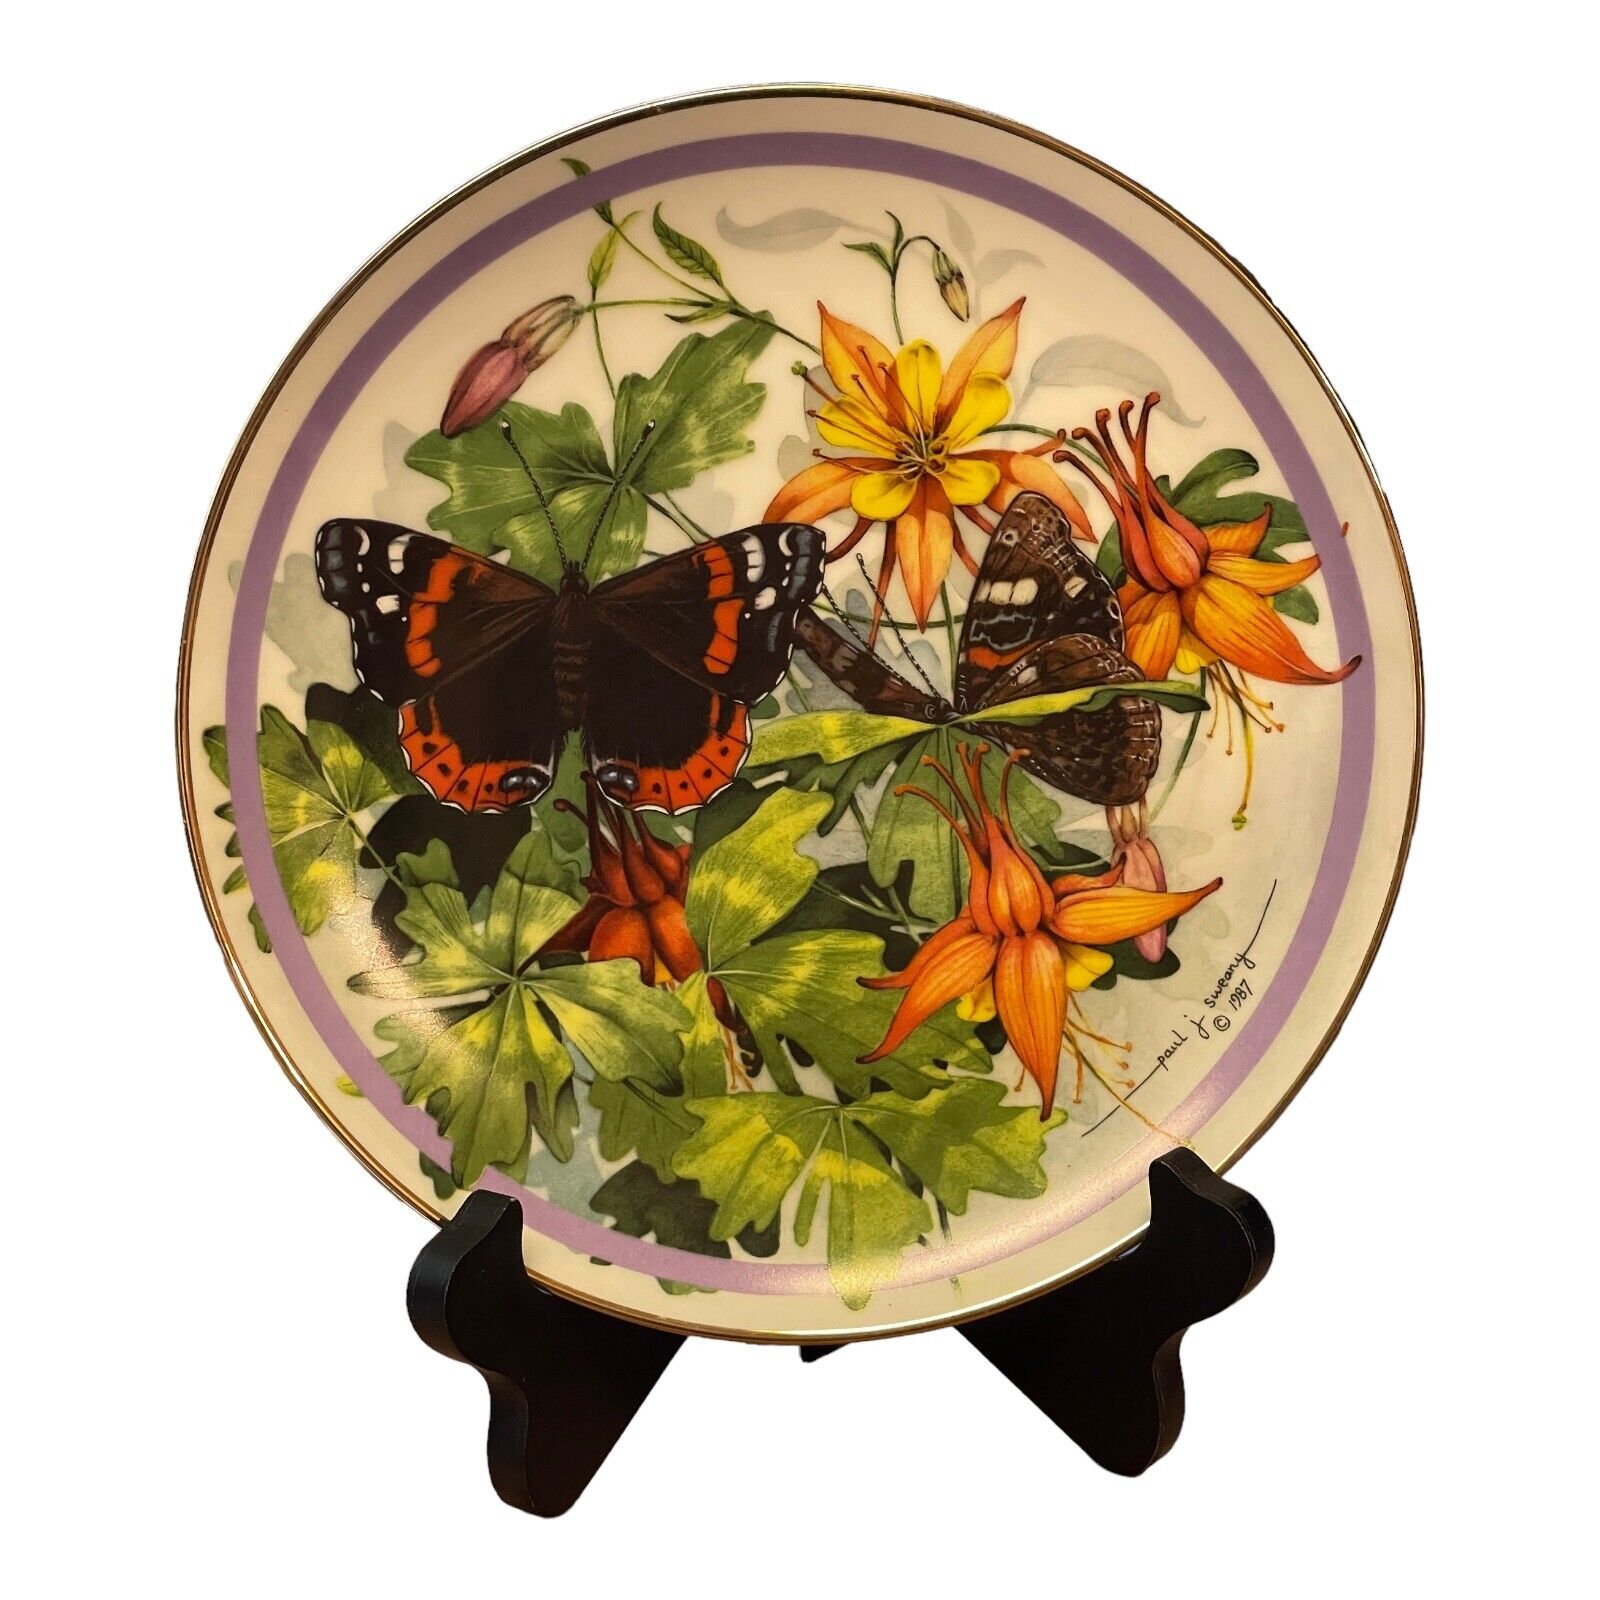 Butterfly Garden Plate Red Admiral 4861B 1986 Paul J. Sweany Hamilton Collection